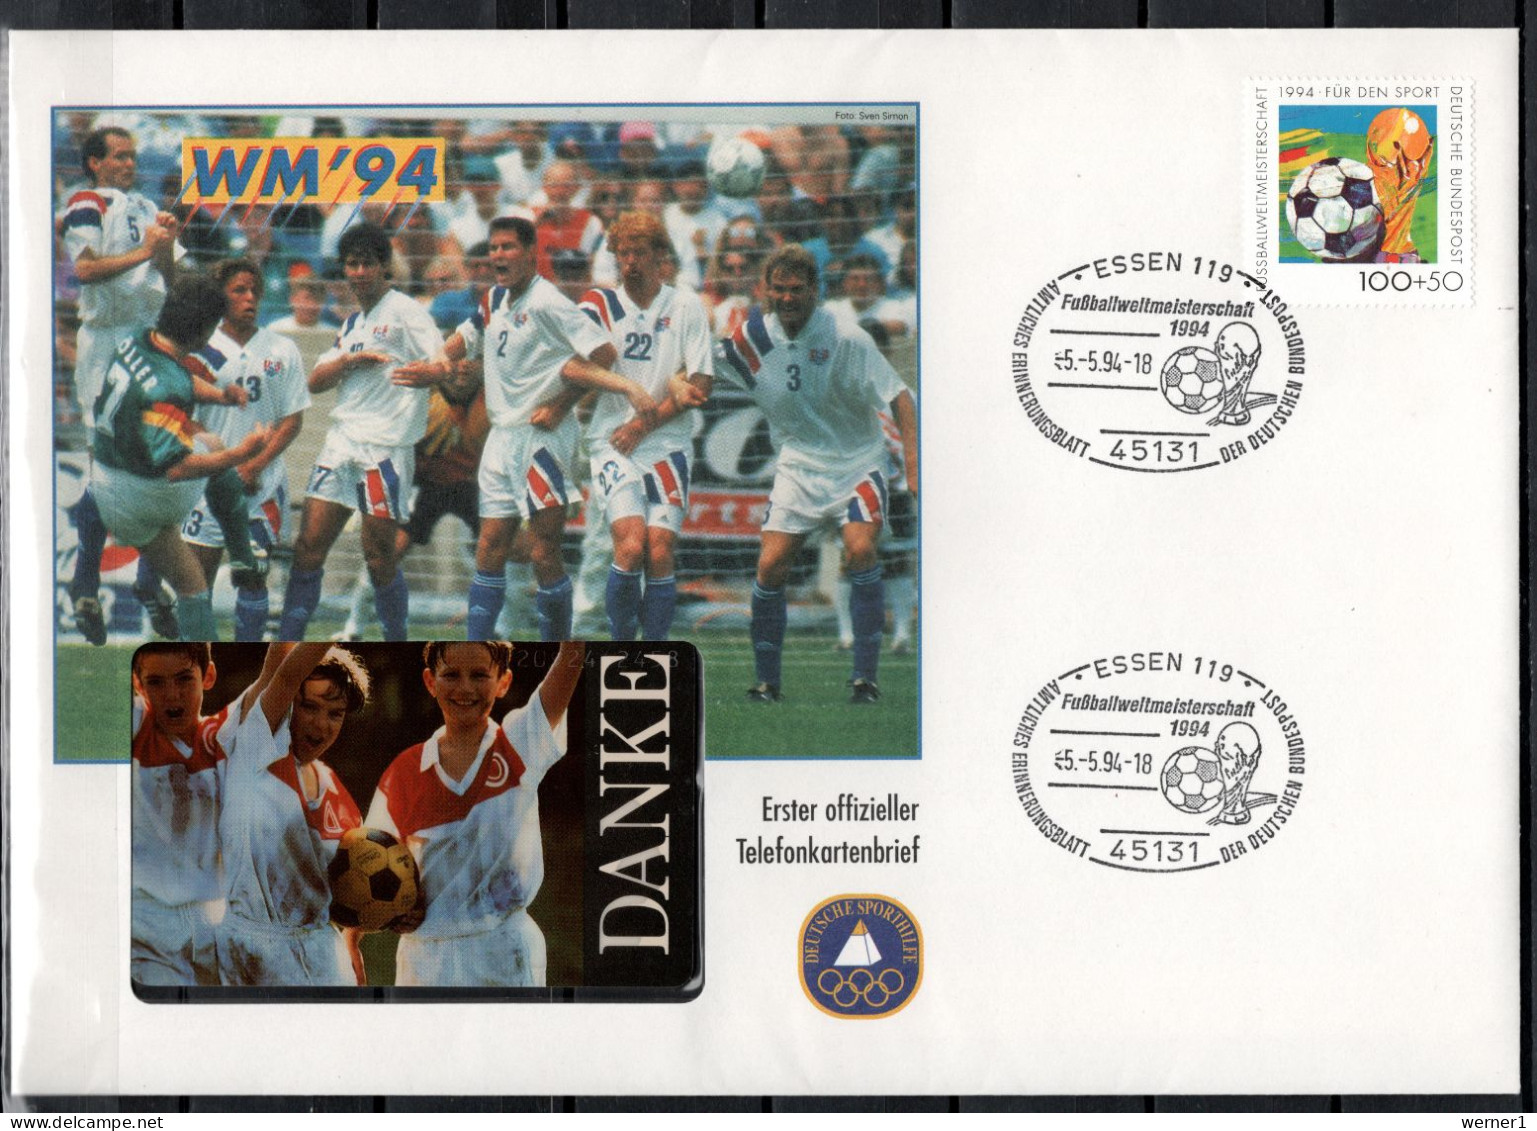 Germany 1994 Football Soccer World Cup Commemorative Cover With Telephone Card - 1994 – USA